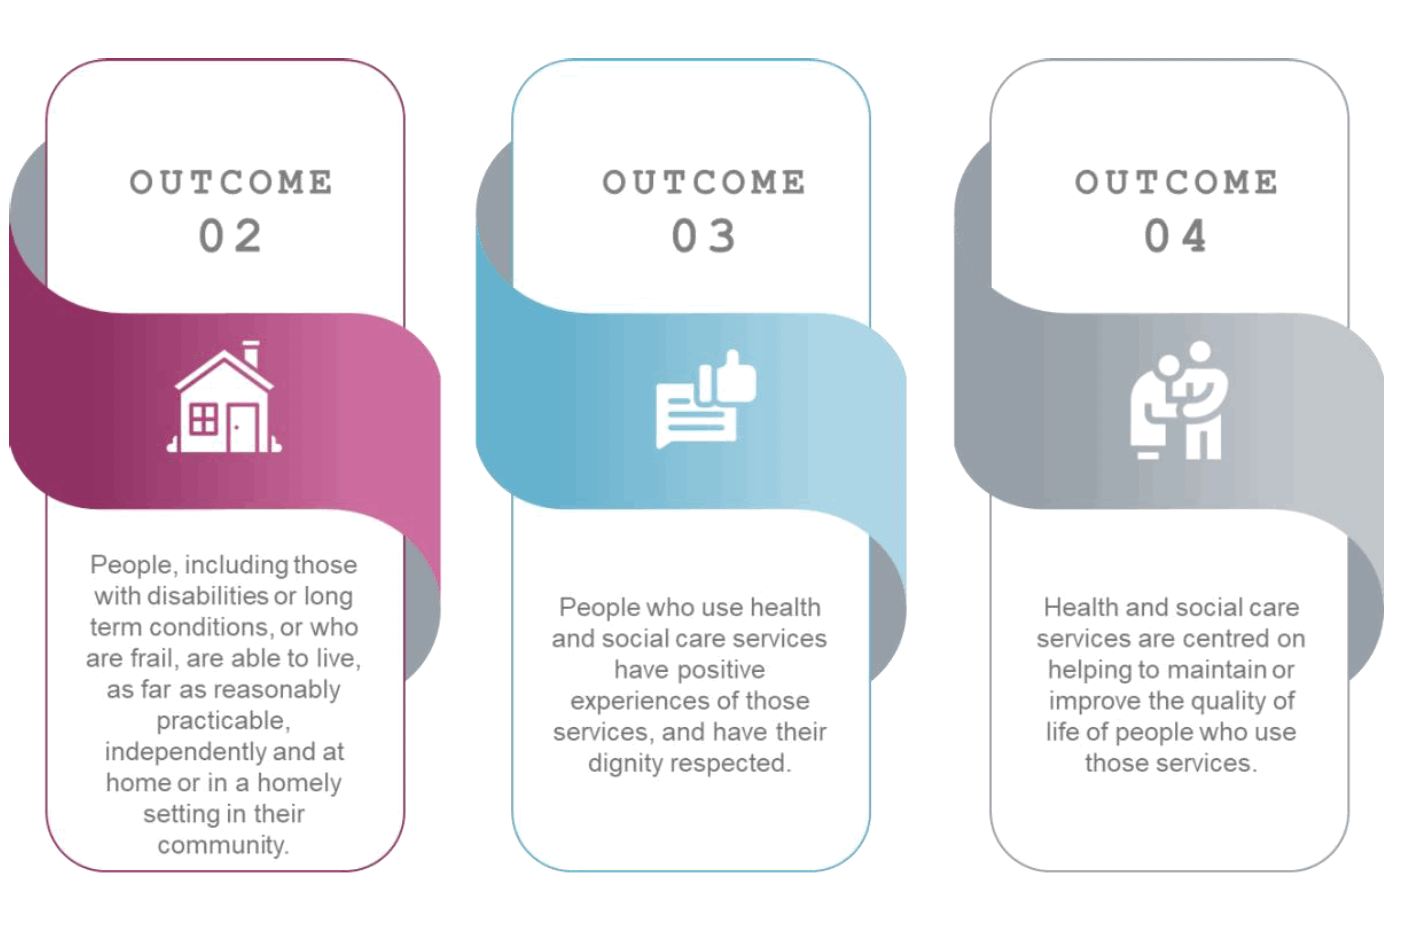 Graphic showing Outcomes 2, 3 and 4 from the National Health and Wellbeing Outcomes. Outcome 2, People, including those with disabilities or long term conditions, or who are frail, are able to live, as far as reasonably practicable, independently and at home or in a homely setting in their community. Outcome 3, People who use health and social care services have positive experiences of those services, and have their dignity respected. Outcome 4, Health and social care services are centred on helping to maintain or improve the quality of life of people who use those services.